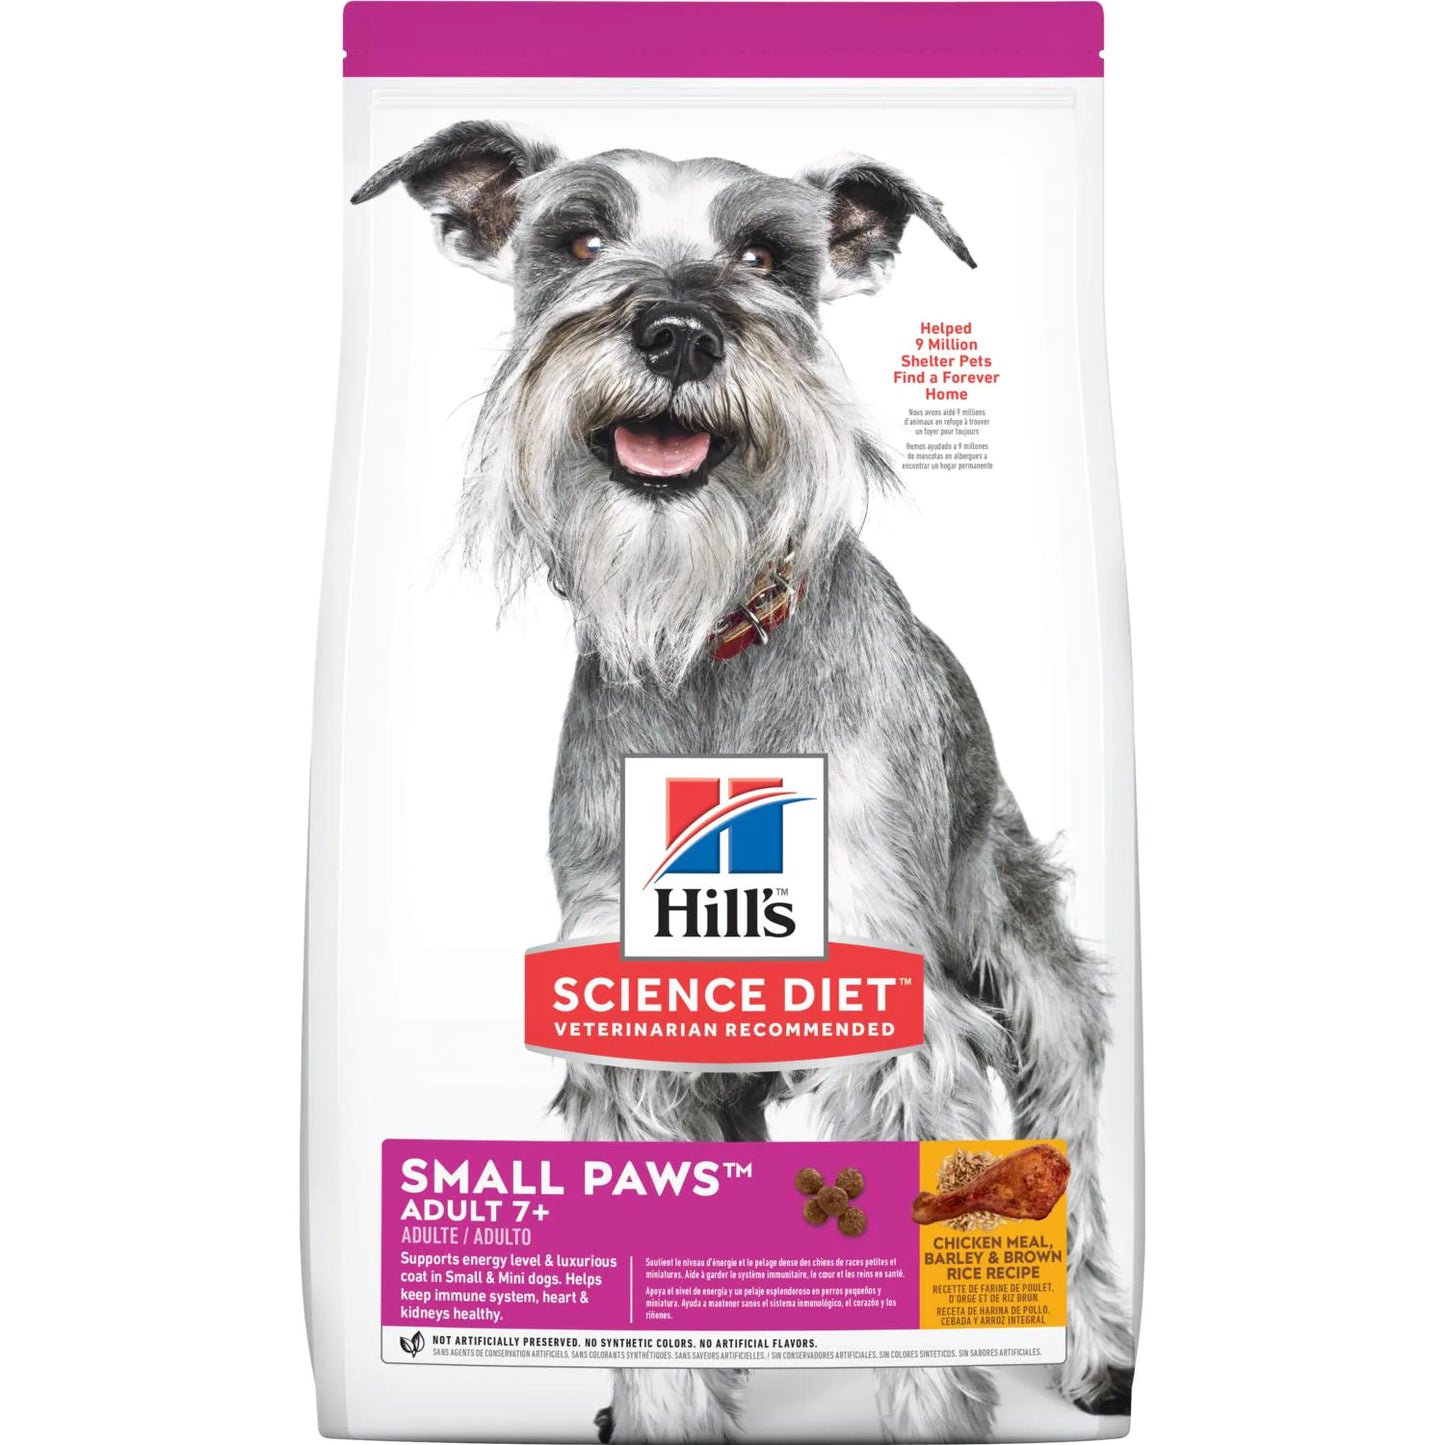 Hill's Science Diet Adult 7+ Small Paws Chicken Meal, Barley & Brown Rice Recipe dog food